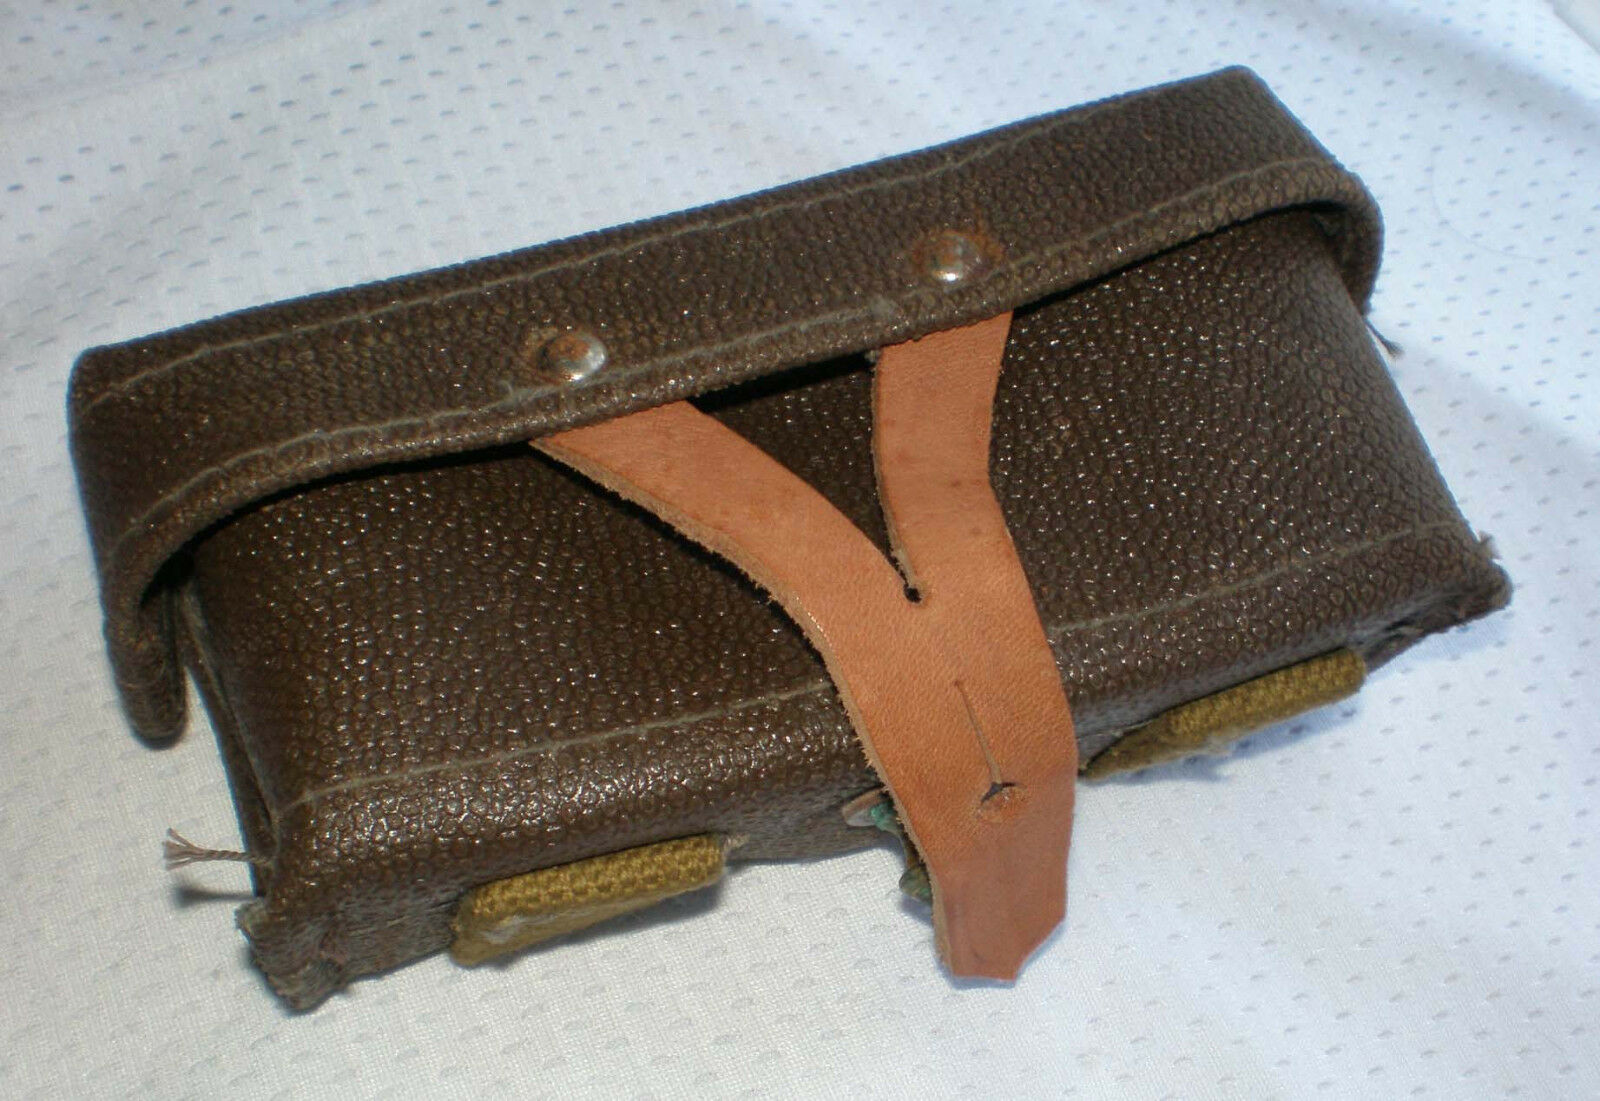 Ussr Soviet Russian Sks 1954-1960 Yrs 100% Original Leather Kirza Ammo Pouch New